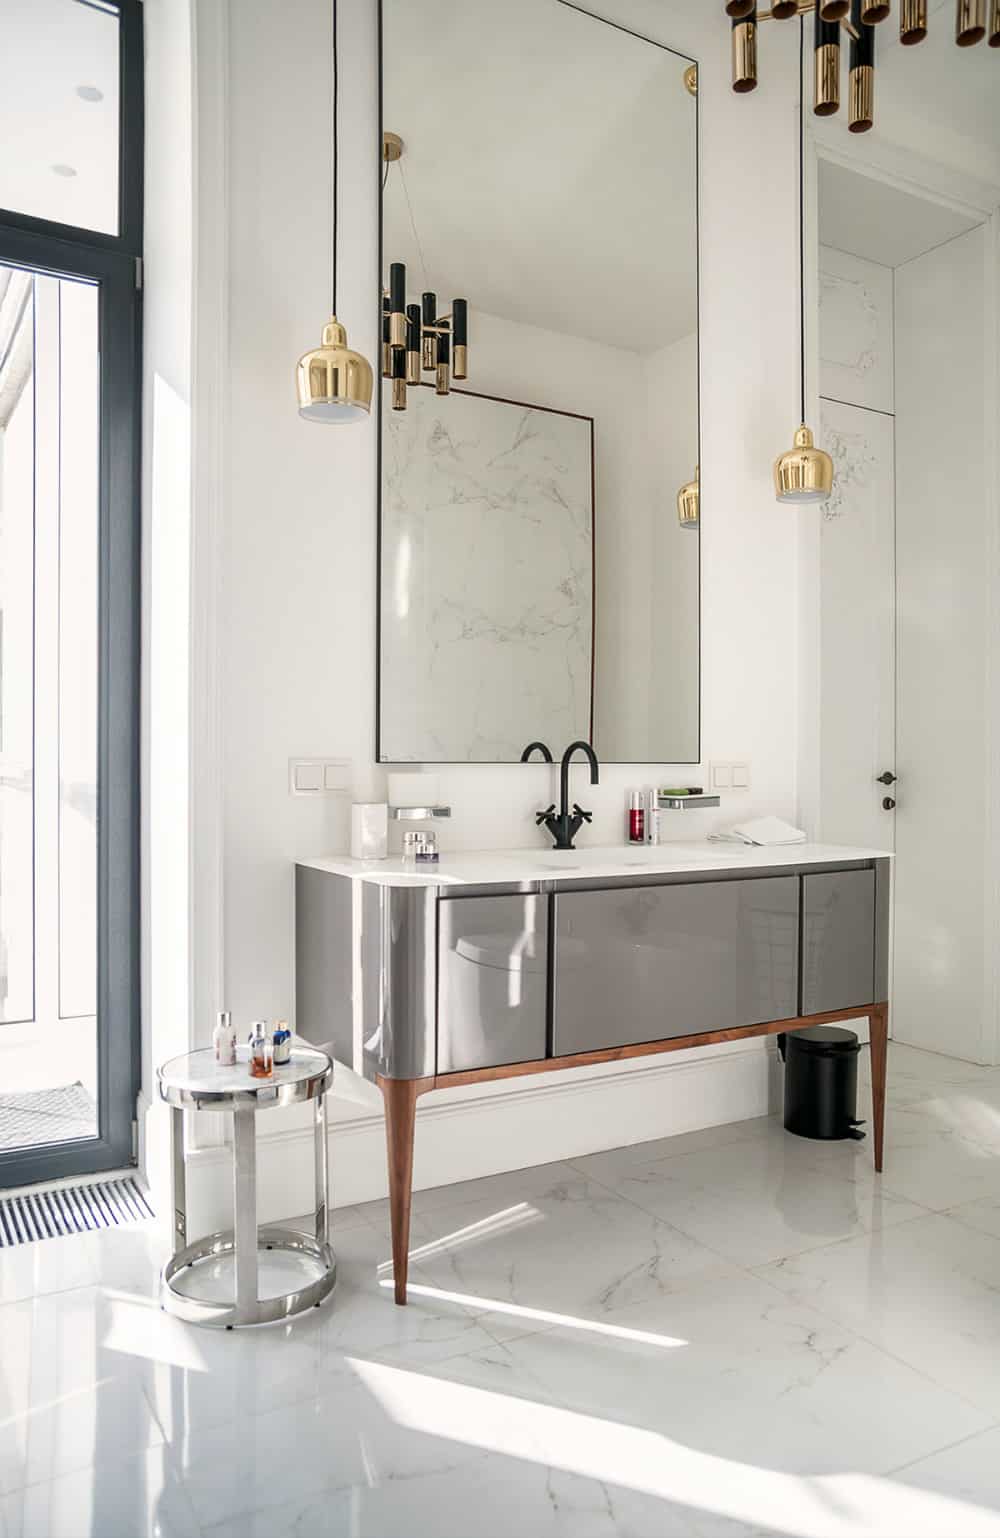 Glossy bathroom vanity gives it an elegant touch